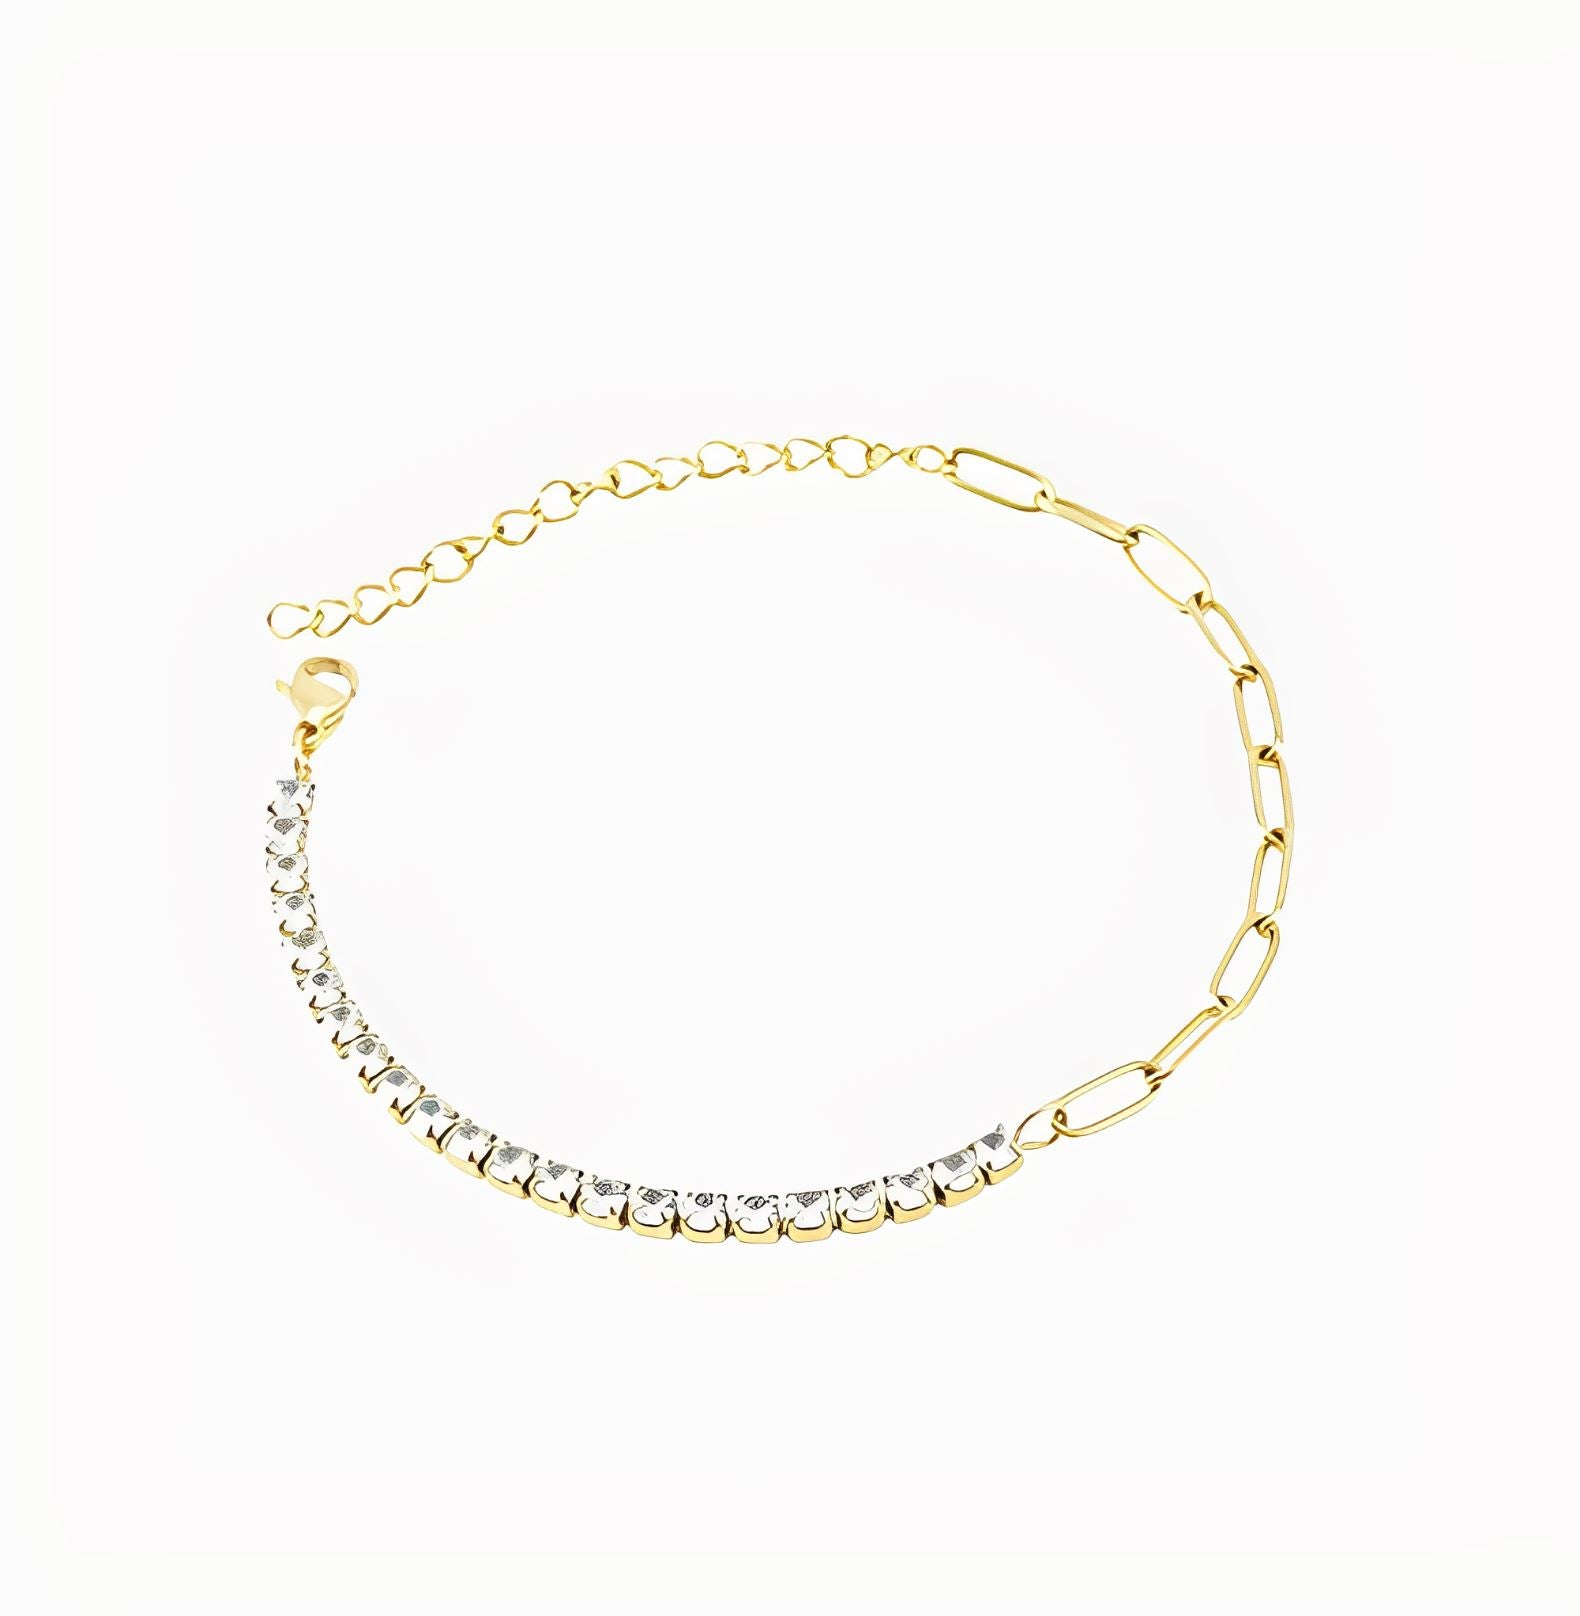 PAPERCLIP BRACLET neck Yubama Jewelry Online Store - The Elegant Designs of Gold and Silver ! 